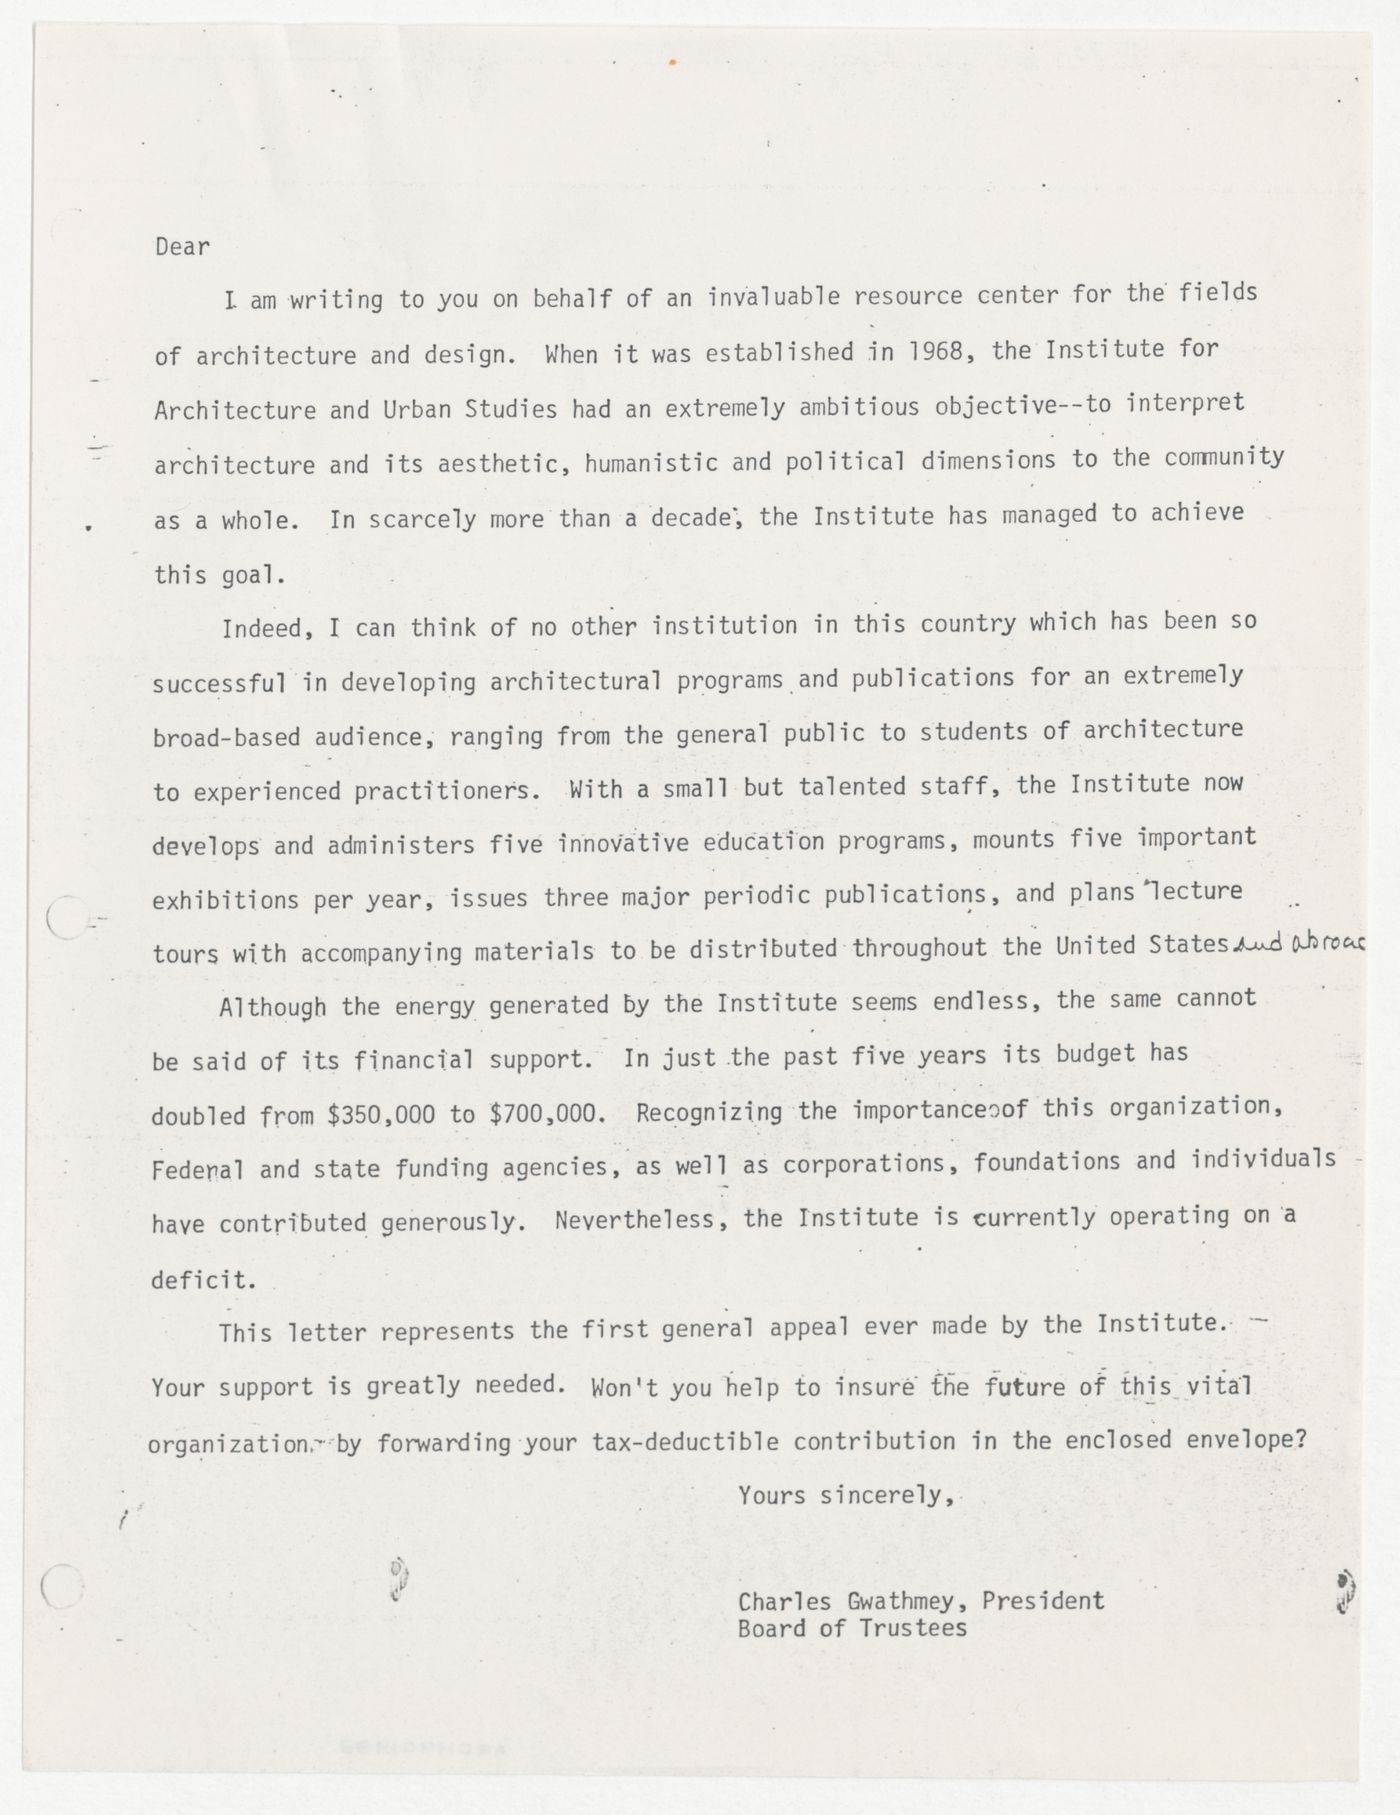 Draft solicitation letter from Charles Gwathmey